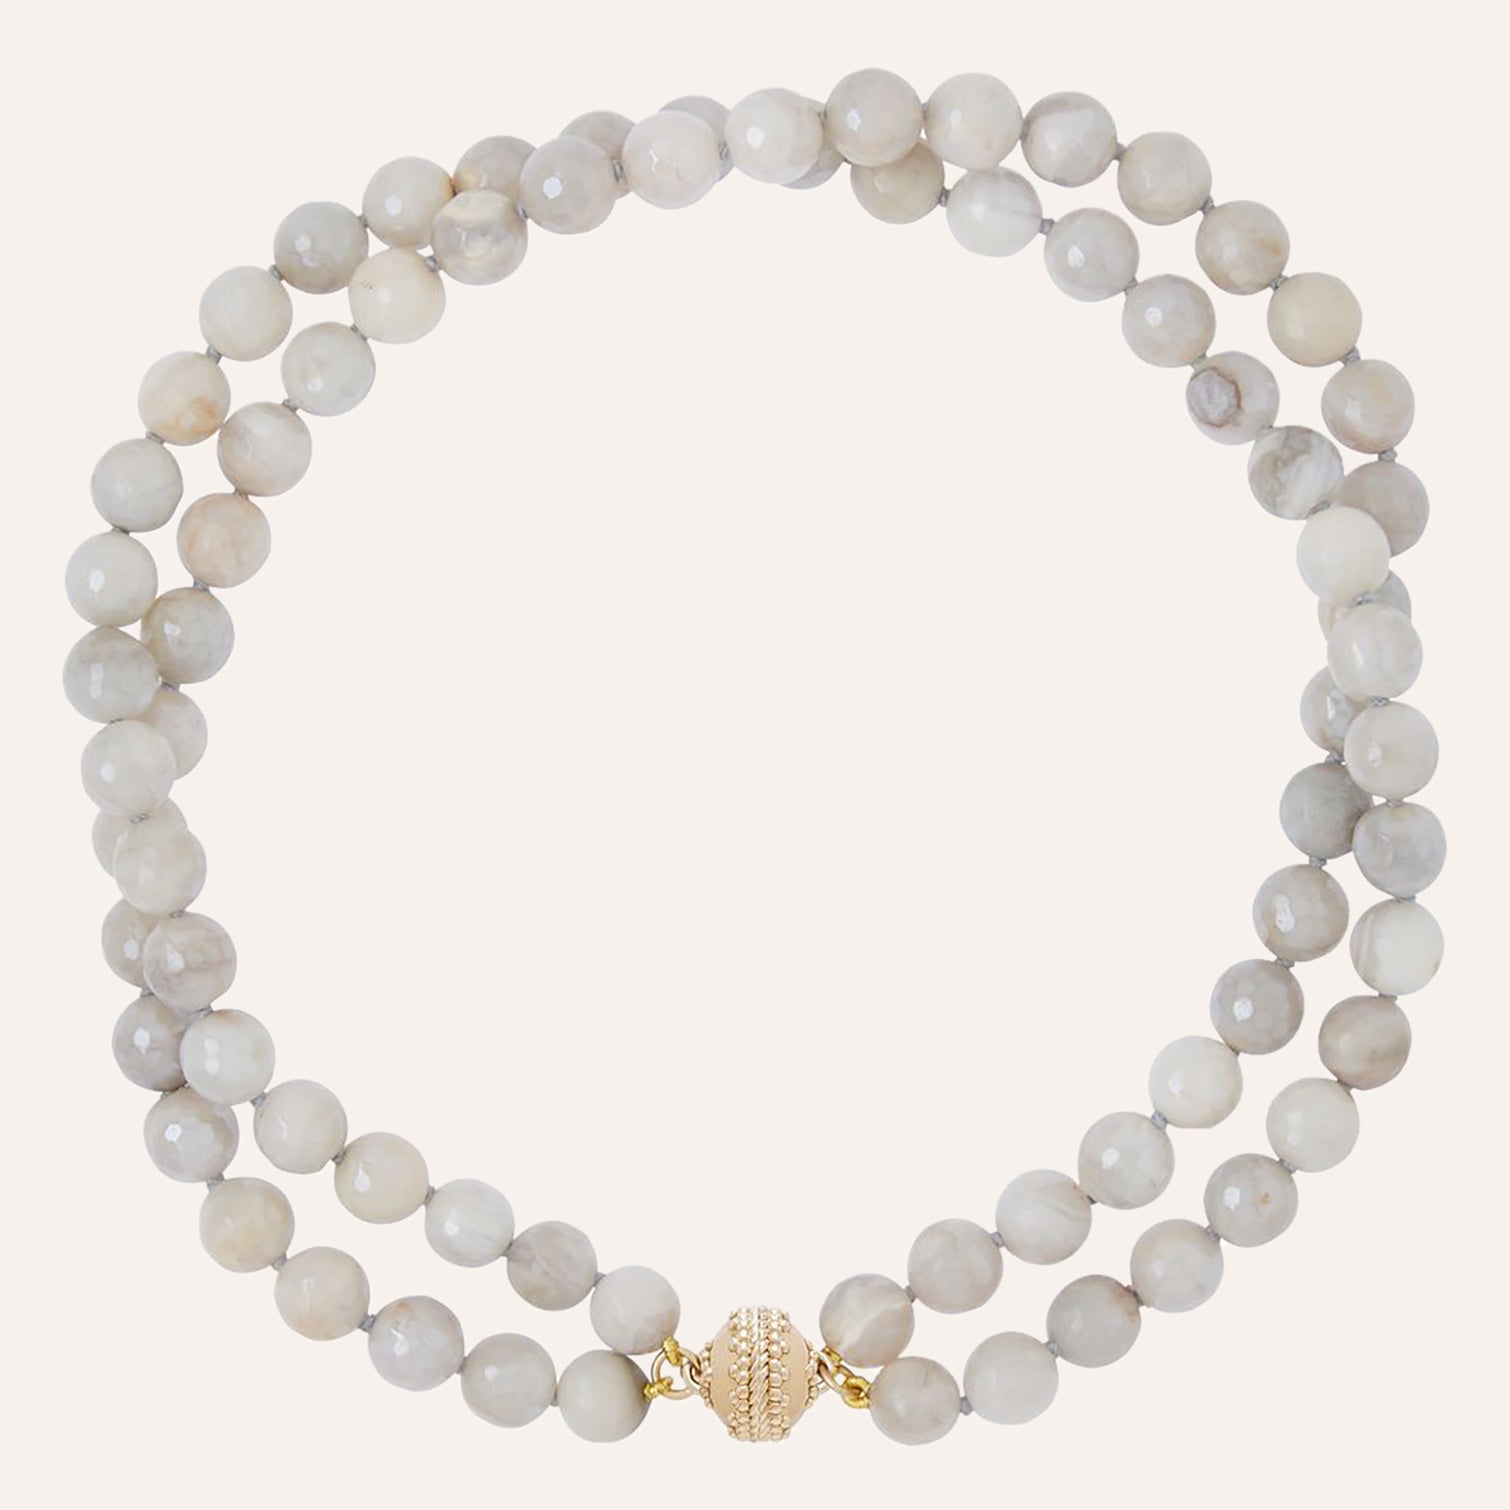 Victoire Light Gray Agate 10mm Double Strand Necklace